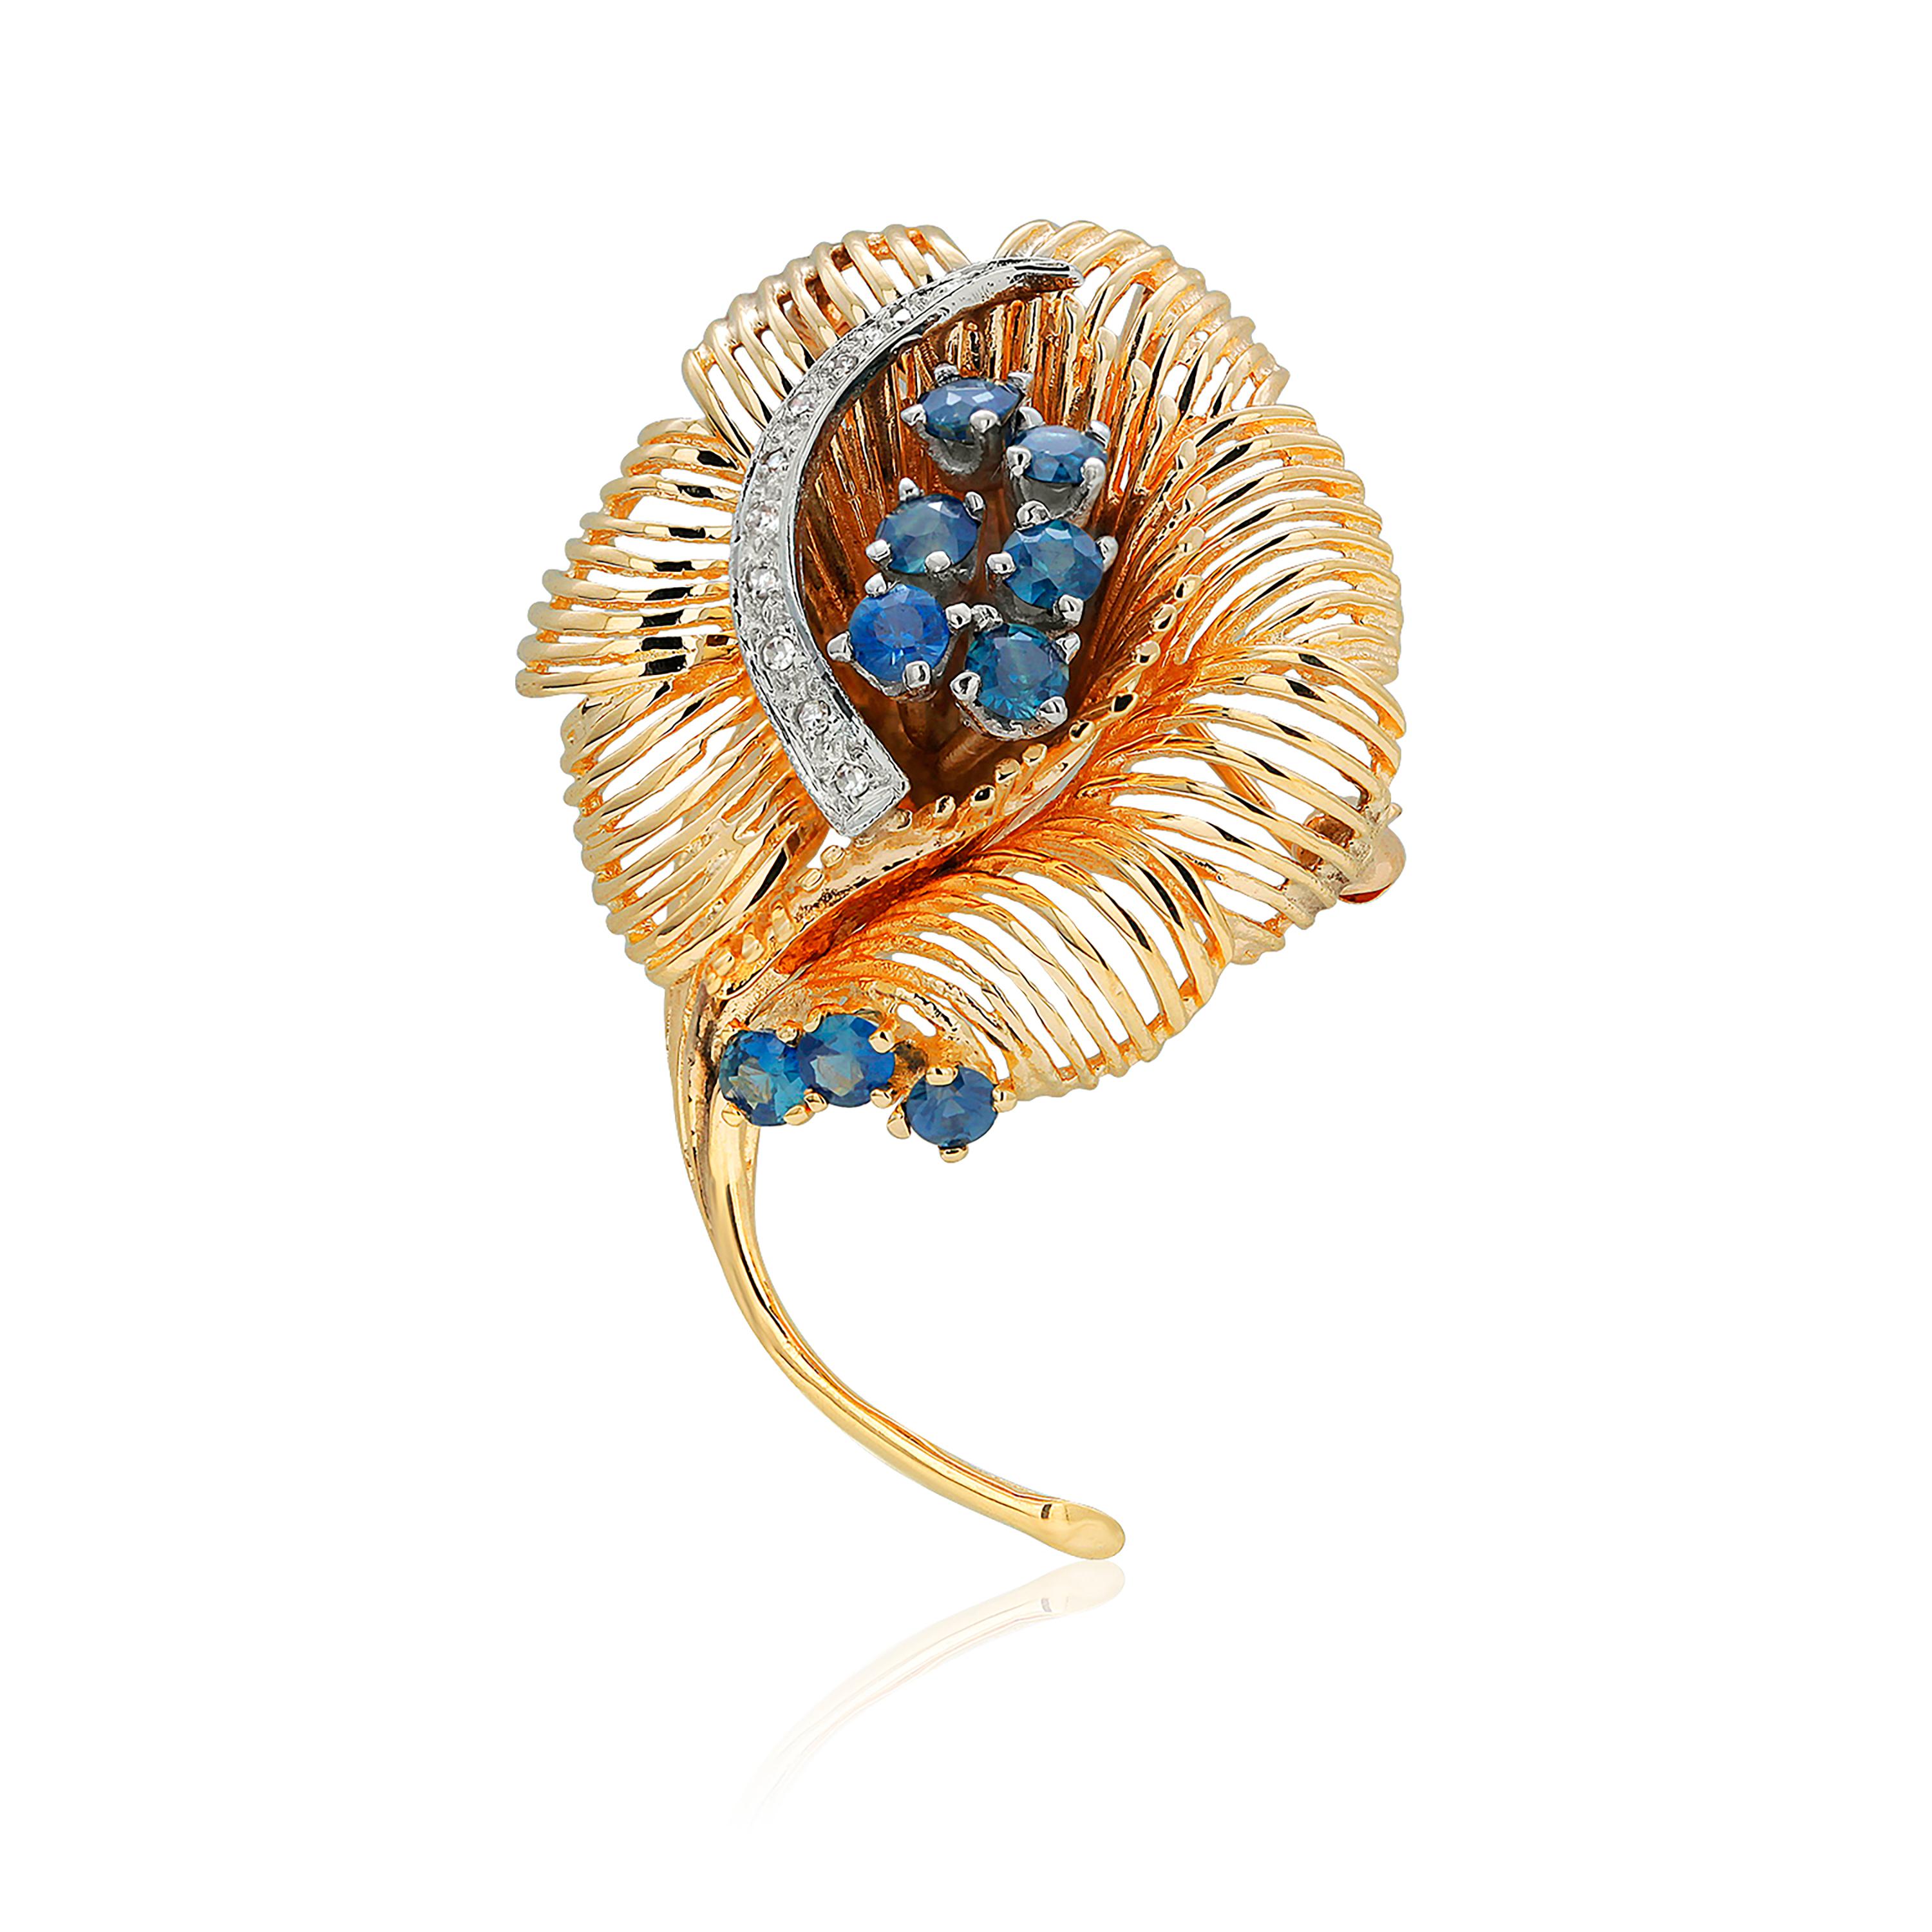 Single Cut Fourteen Karat Yellow Gold Floral Brooch Pendant with Diamonds and Sapphires